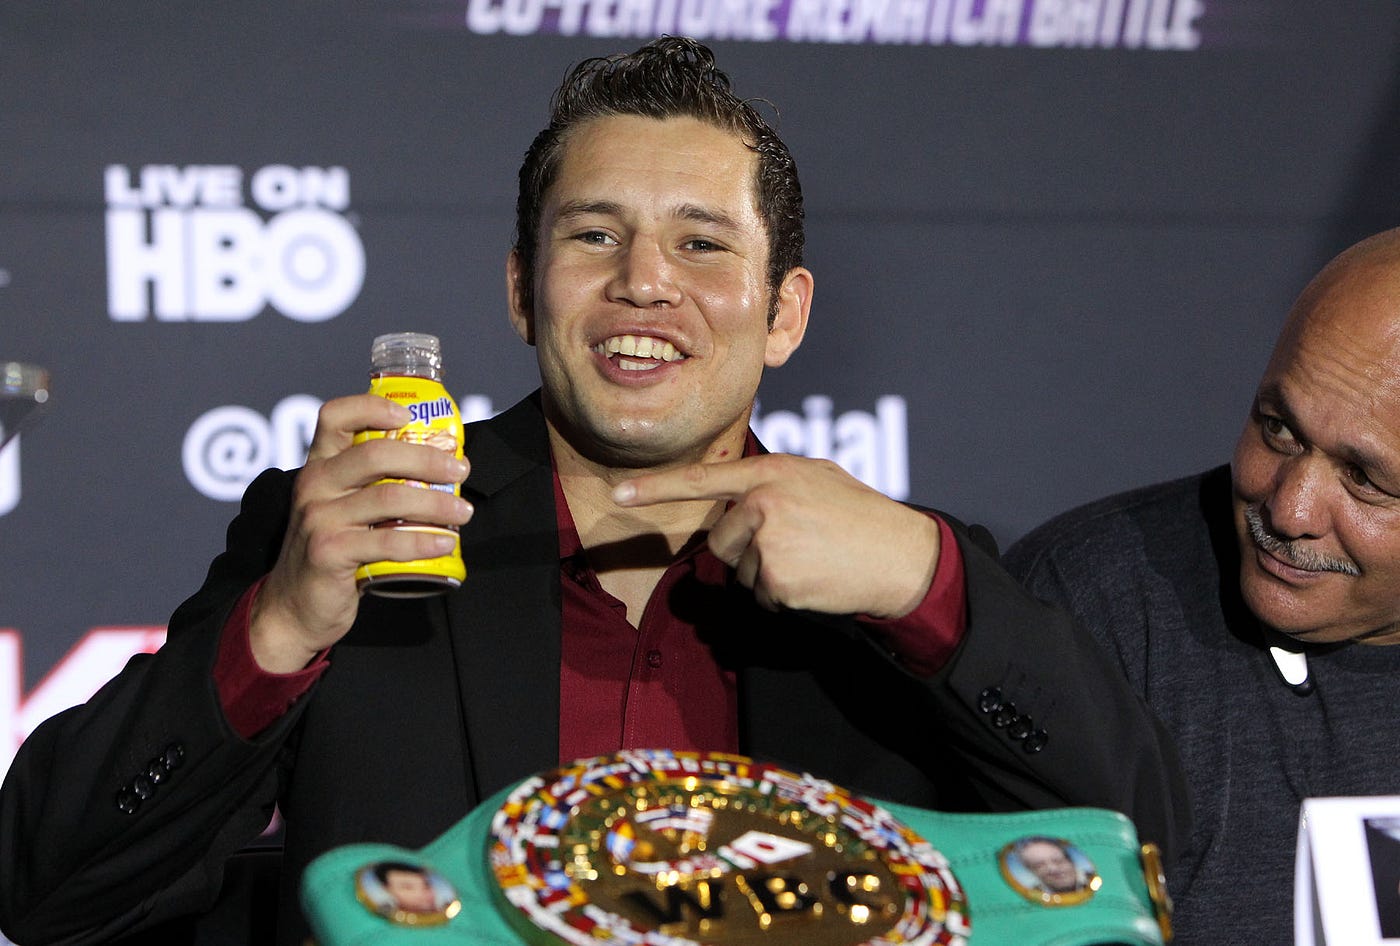 Looking at 10 of the Best Trash Talkers in Boxing today